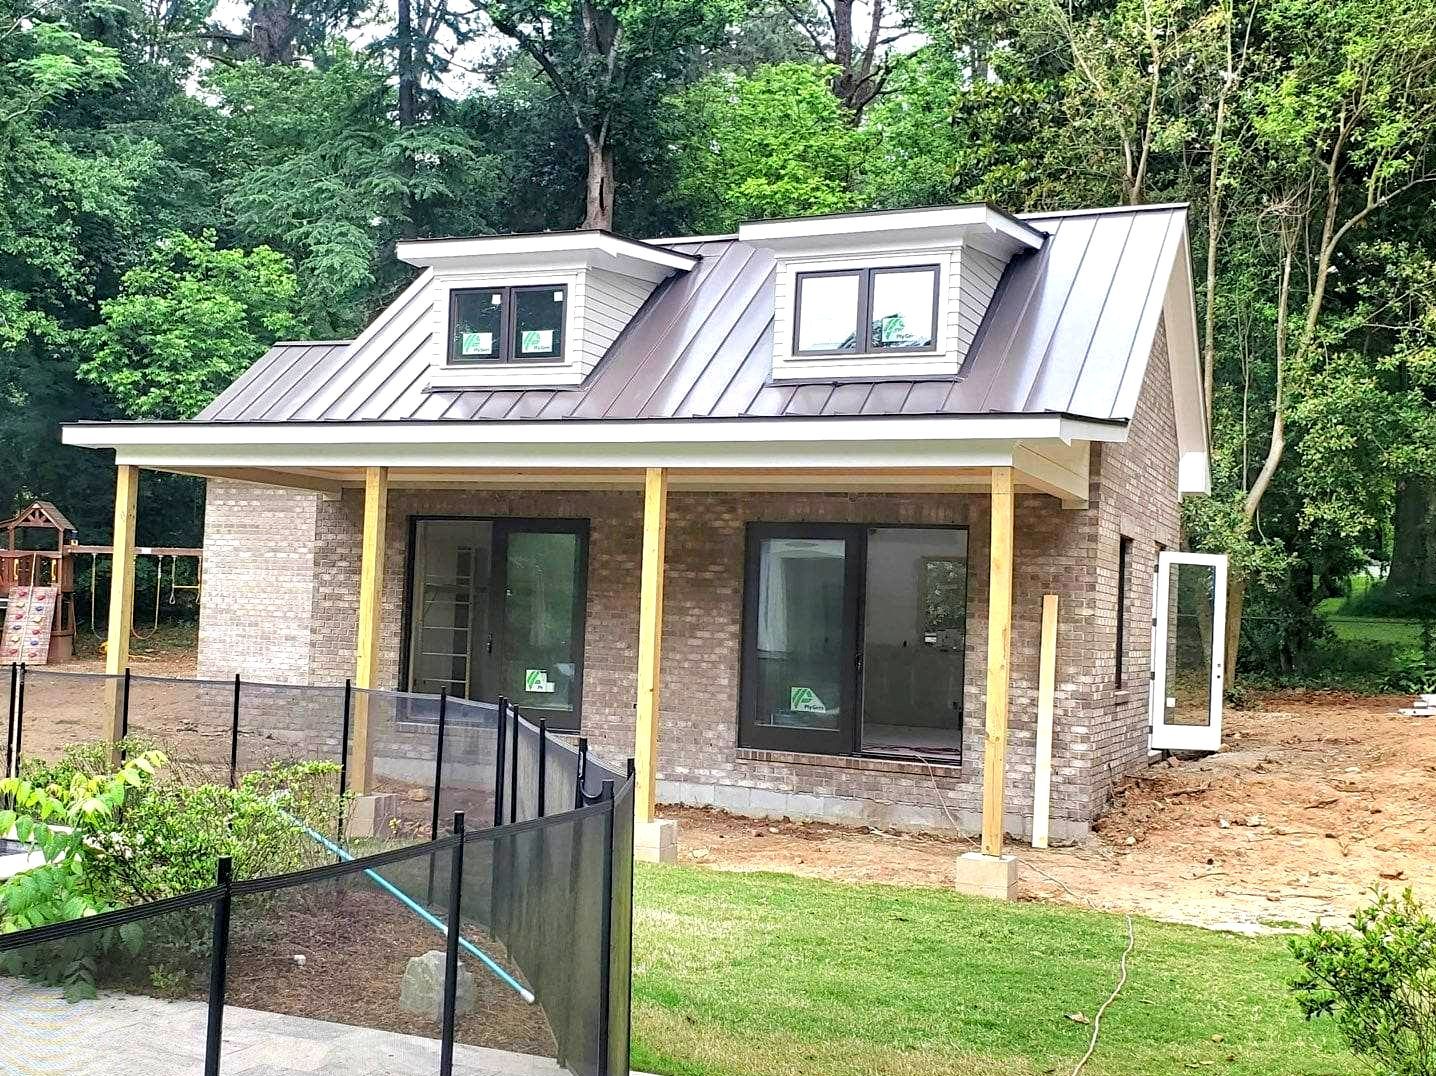 A small house with a metal roof is being built in the woods.